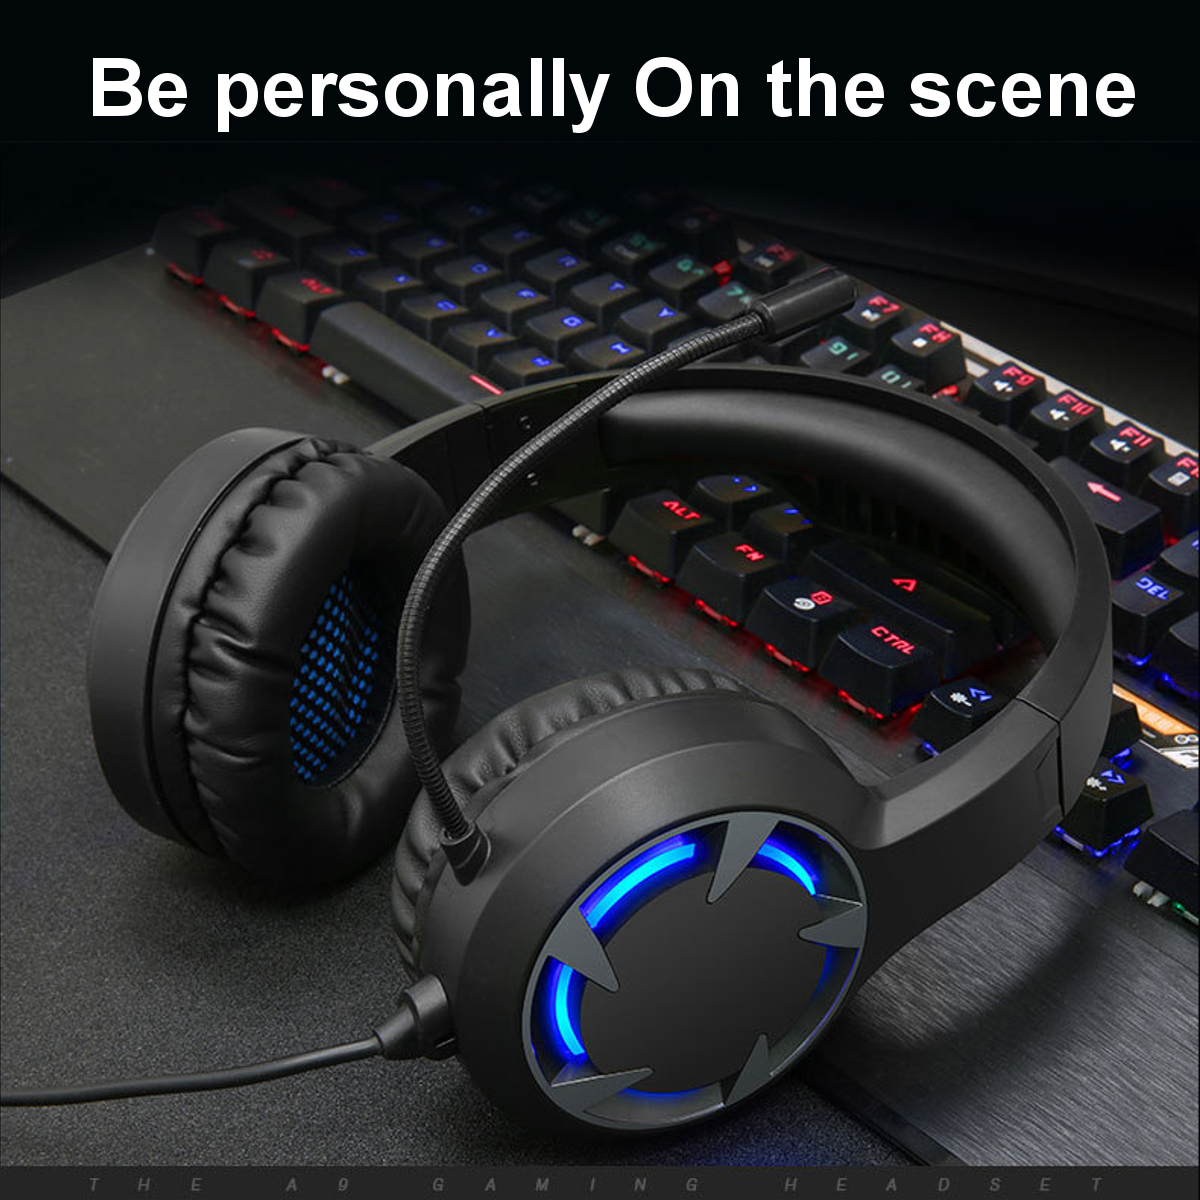 Bakeey-Wired-Headphones-Stereo-Bass-Surround-Gaming-Headset-for-PS4-New-for-Xbox-One-PC-with-Mic-1866137-5